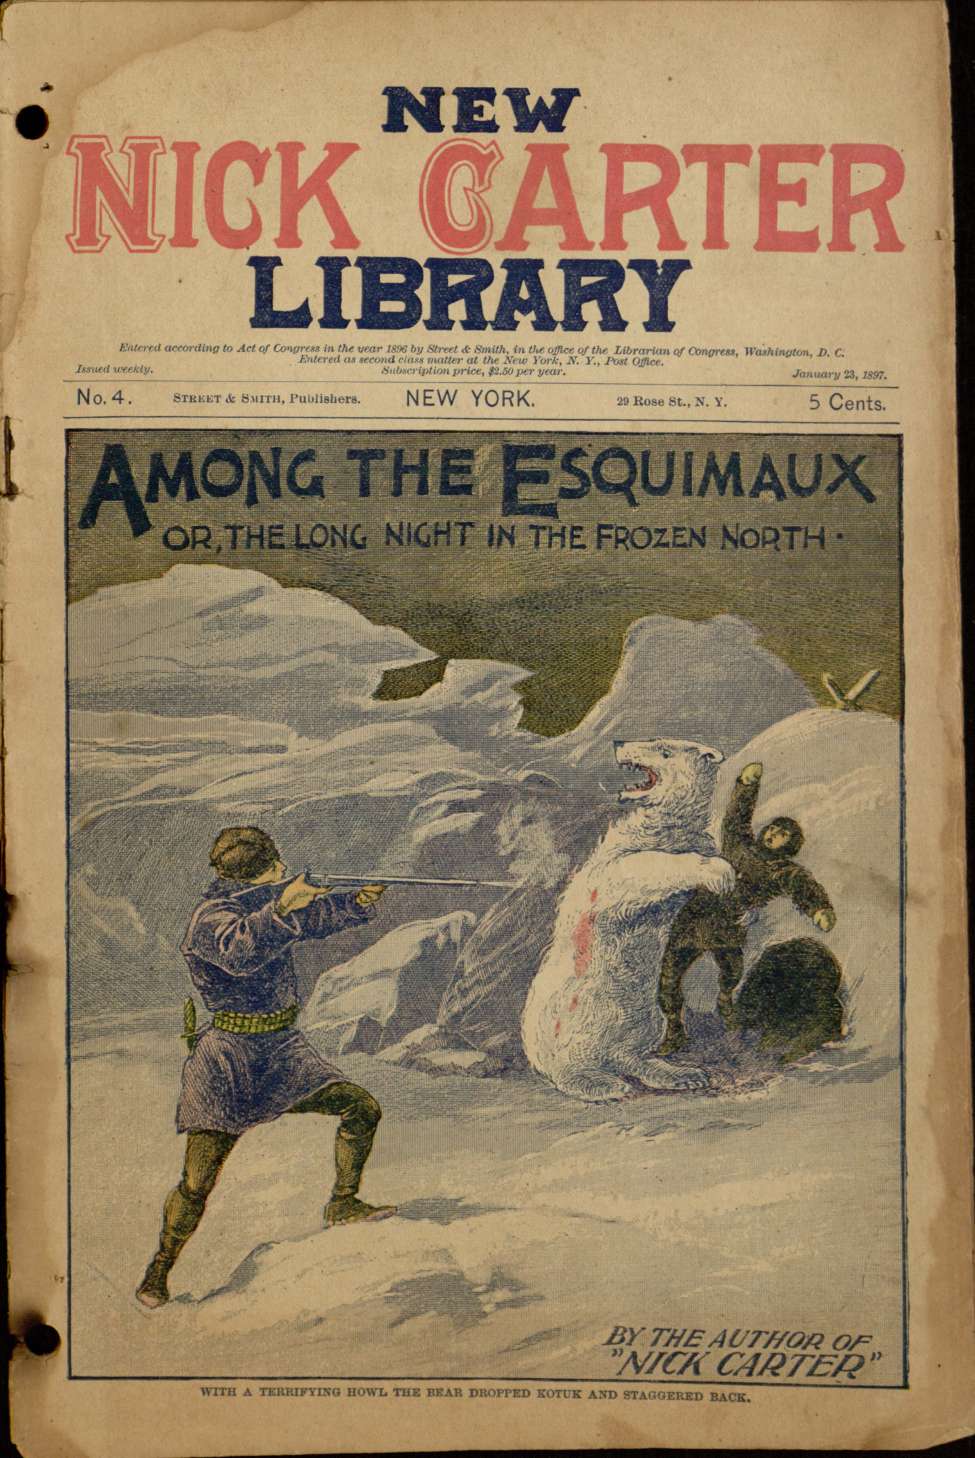 Book Cover For New Nick Carter Library 4 - Trim Among the Esquimaux